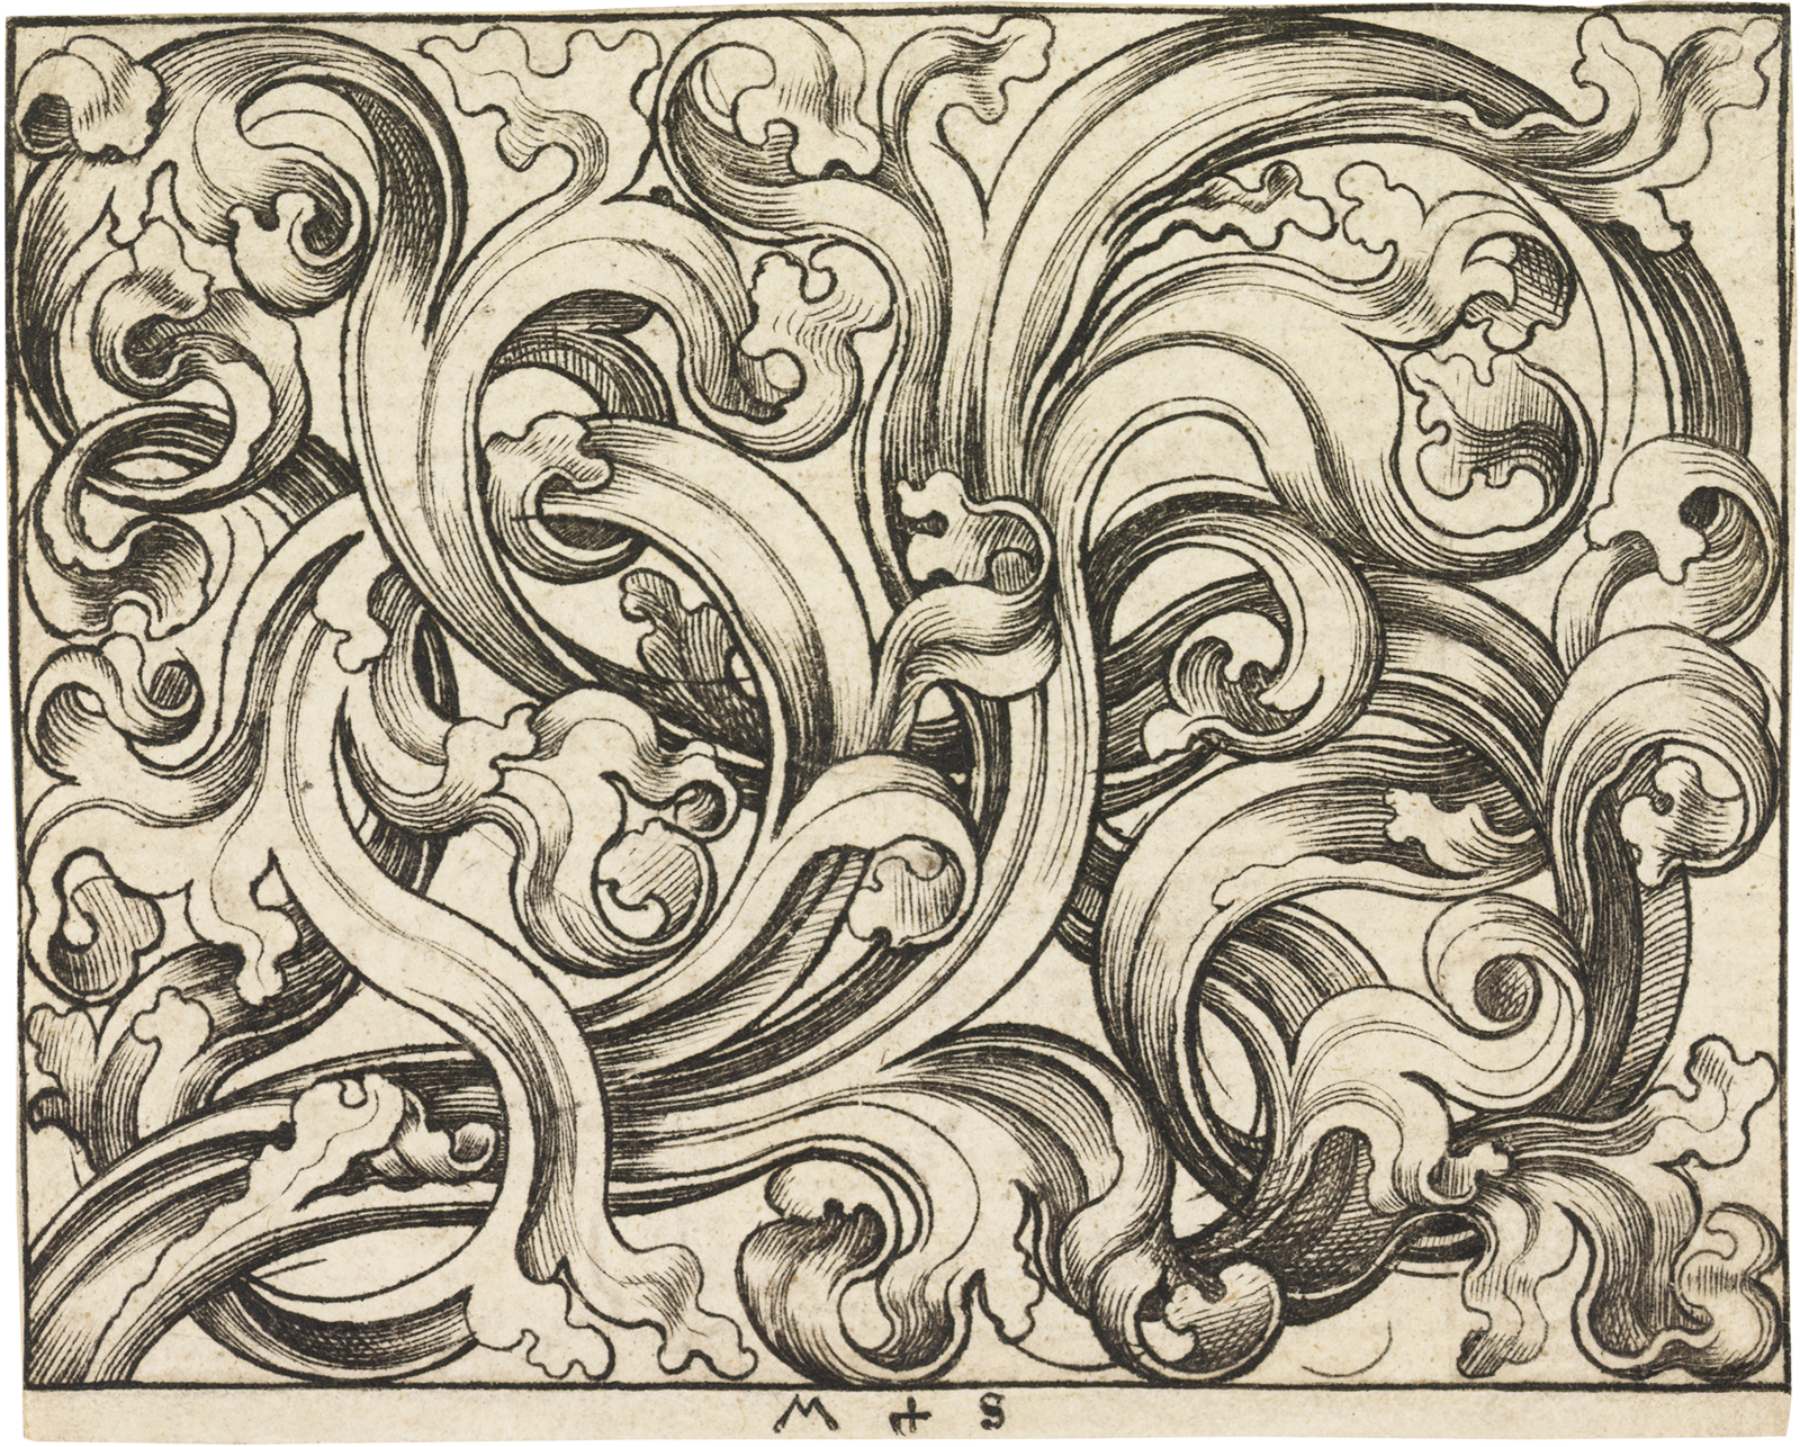 Martin Schongauer, Querfüllung auf hellem Grund (Horizontal Ornament), c. 1470. Engraving on white paper, 2 5/16 x 2 15/16 inches (5.9 x 7.4 cm). Museum purchase in memory of George Campbell Cooper, Cooper Hewitt, Smithsonian Design Museum, Smithsonian Institution.